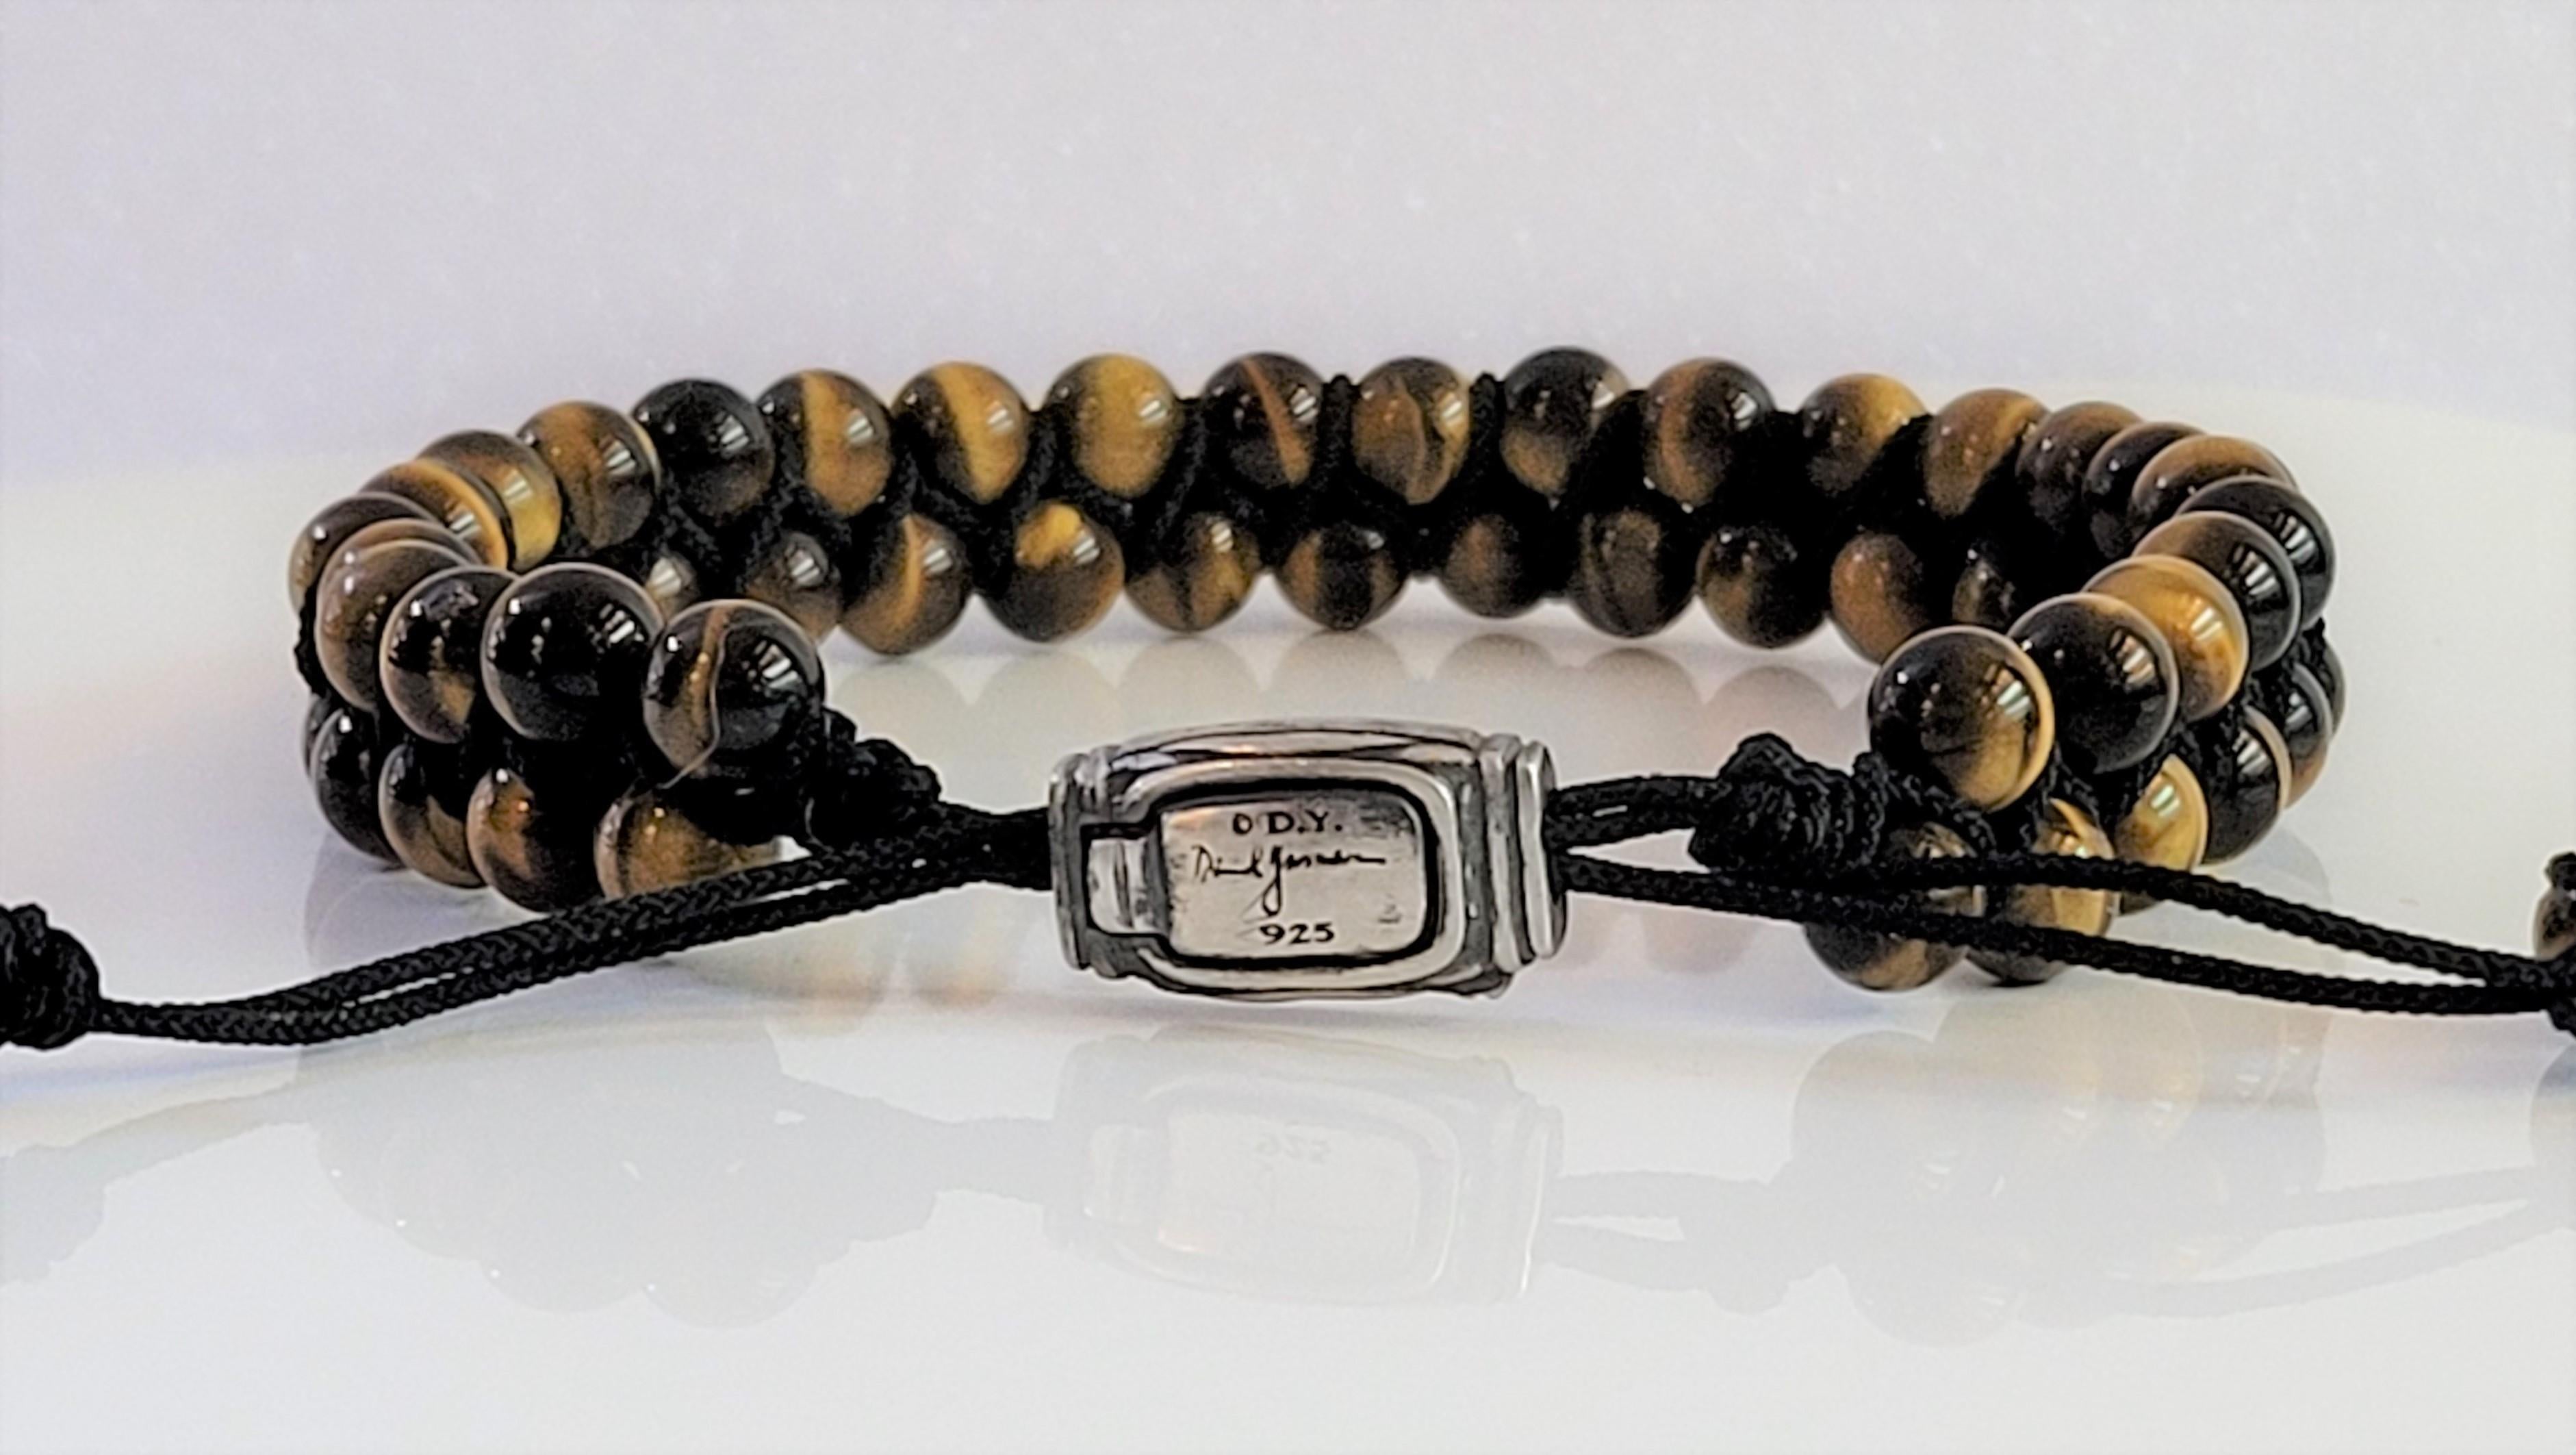 Women's Spiritual Beads Two Row Woven Bracelet Tiger’s Eye with Sterling Silver, 6mm